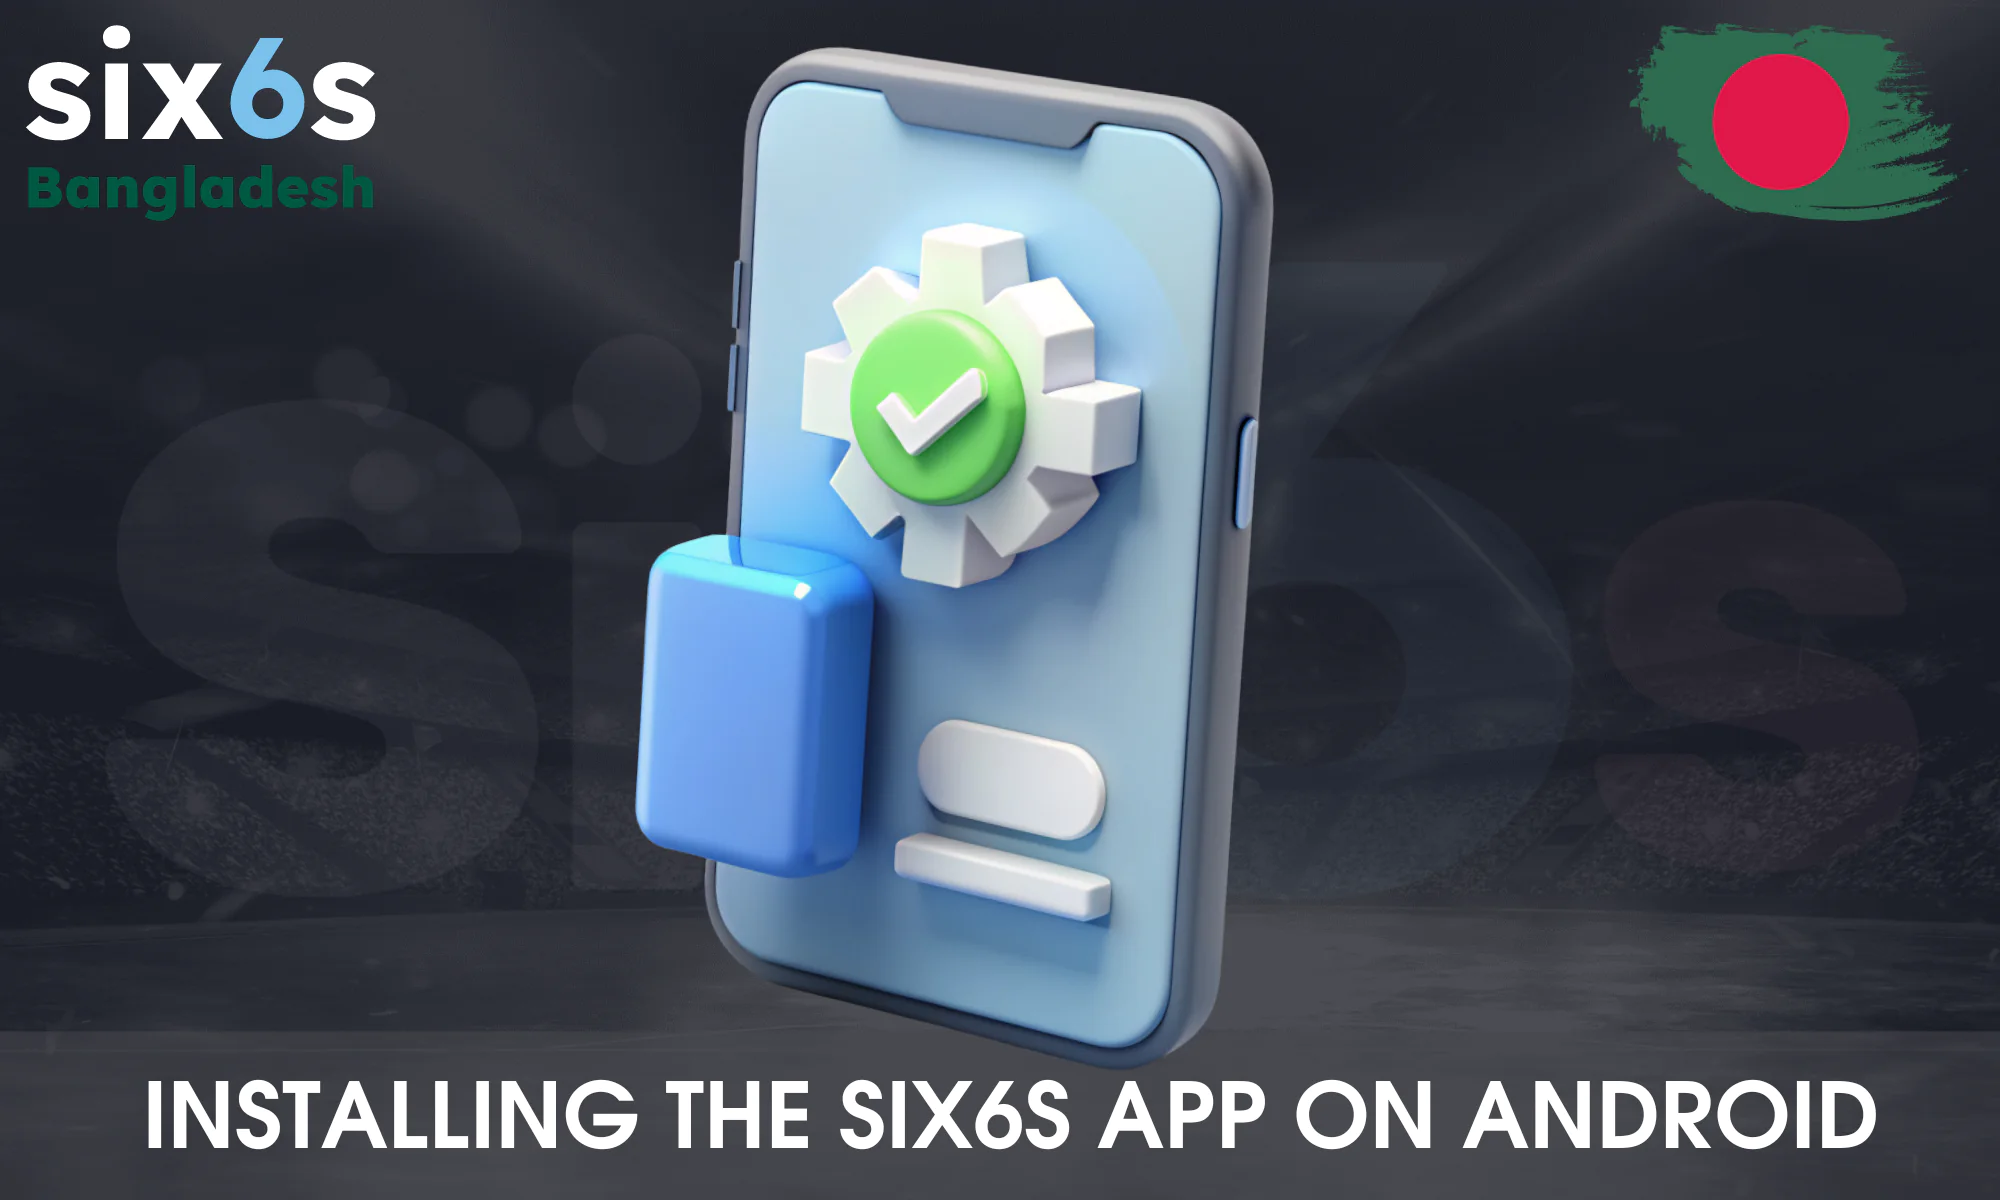 Step by step instructions on how to download and install Six6s app on Android phones